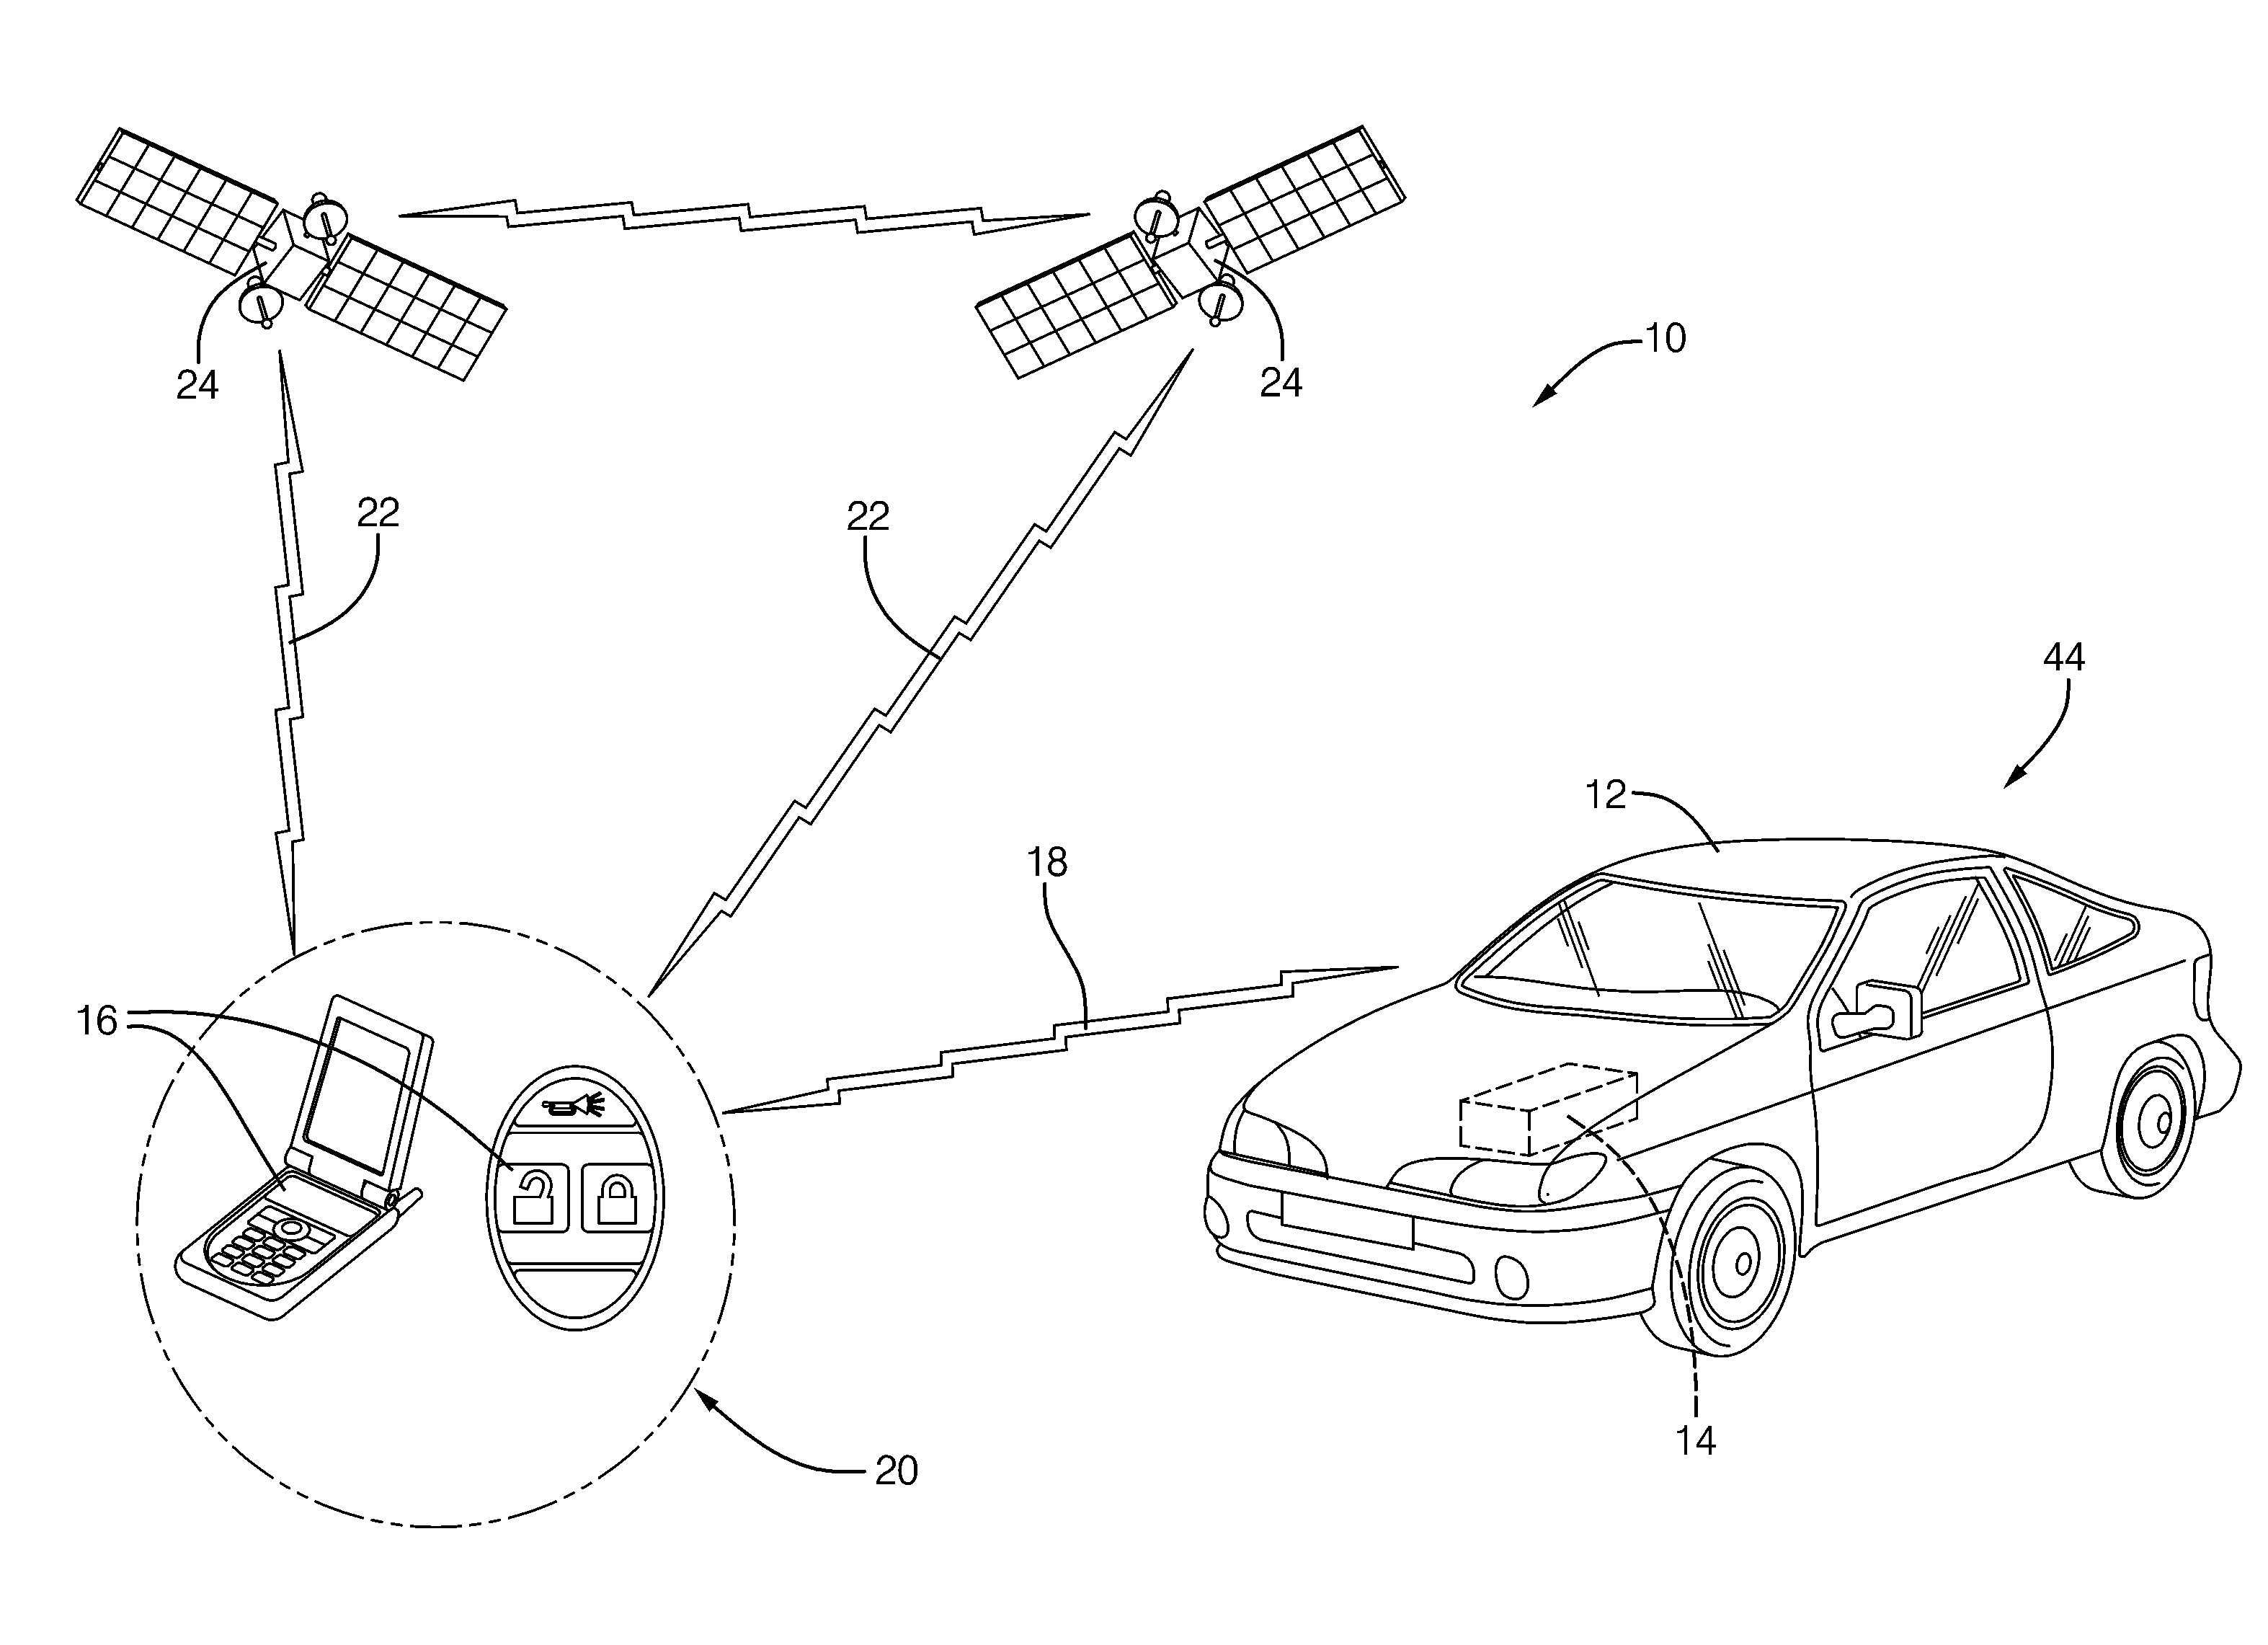 Vehicle security system and method of operation based on a nomadic device location